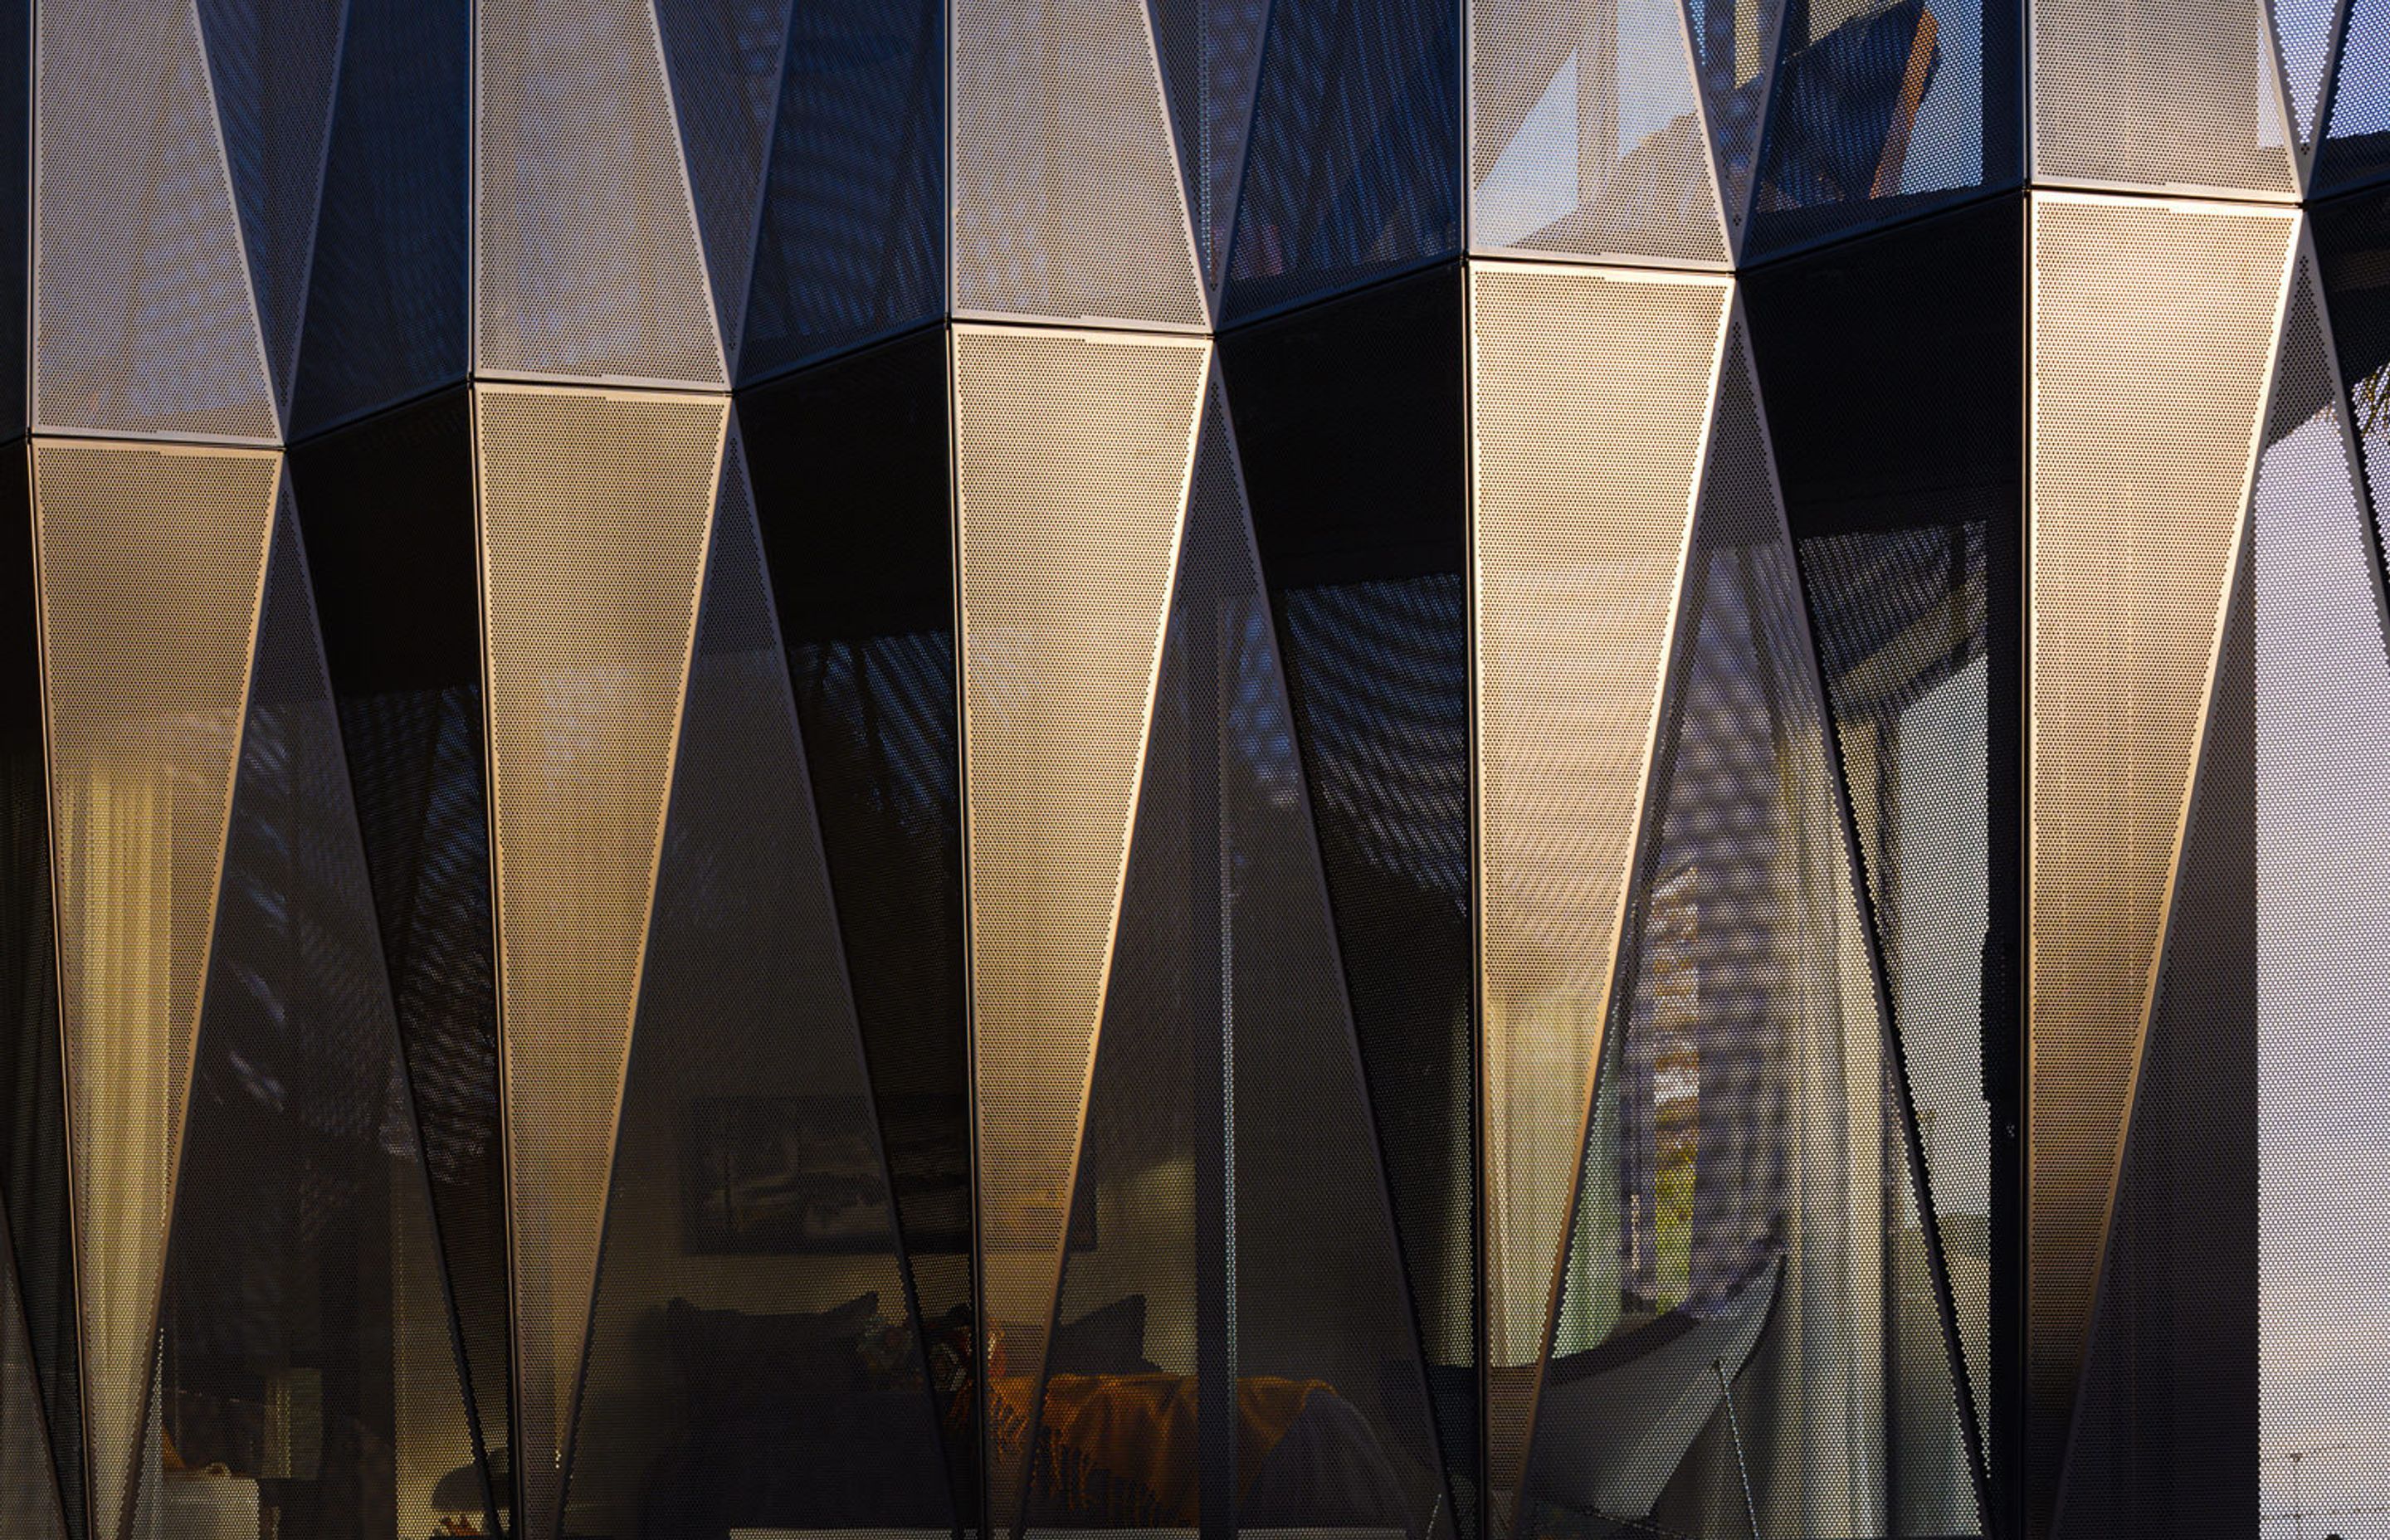 Geometric shade fins made from perforated, powder-coated aluminium were devised to address issues around light, shade and privacy on the east-facing street frontage.